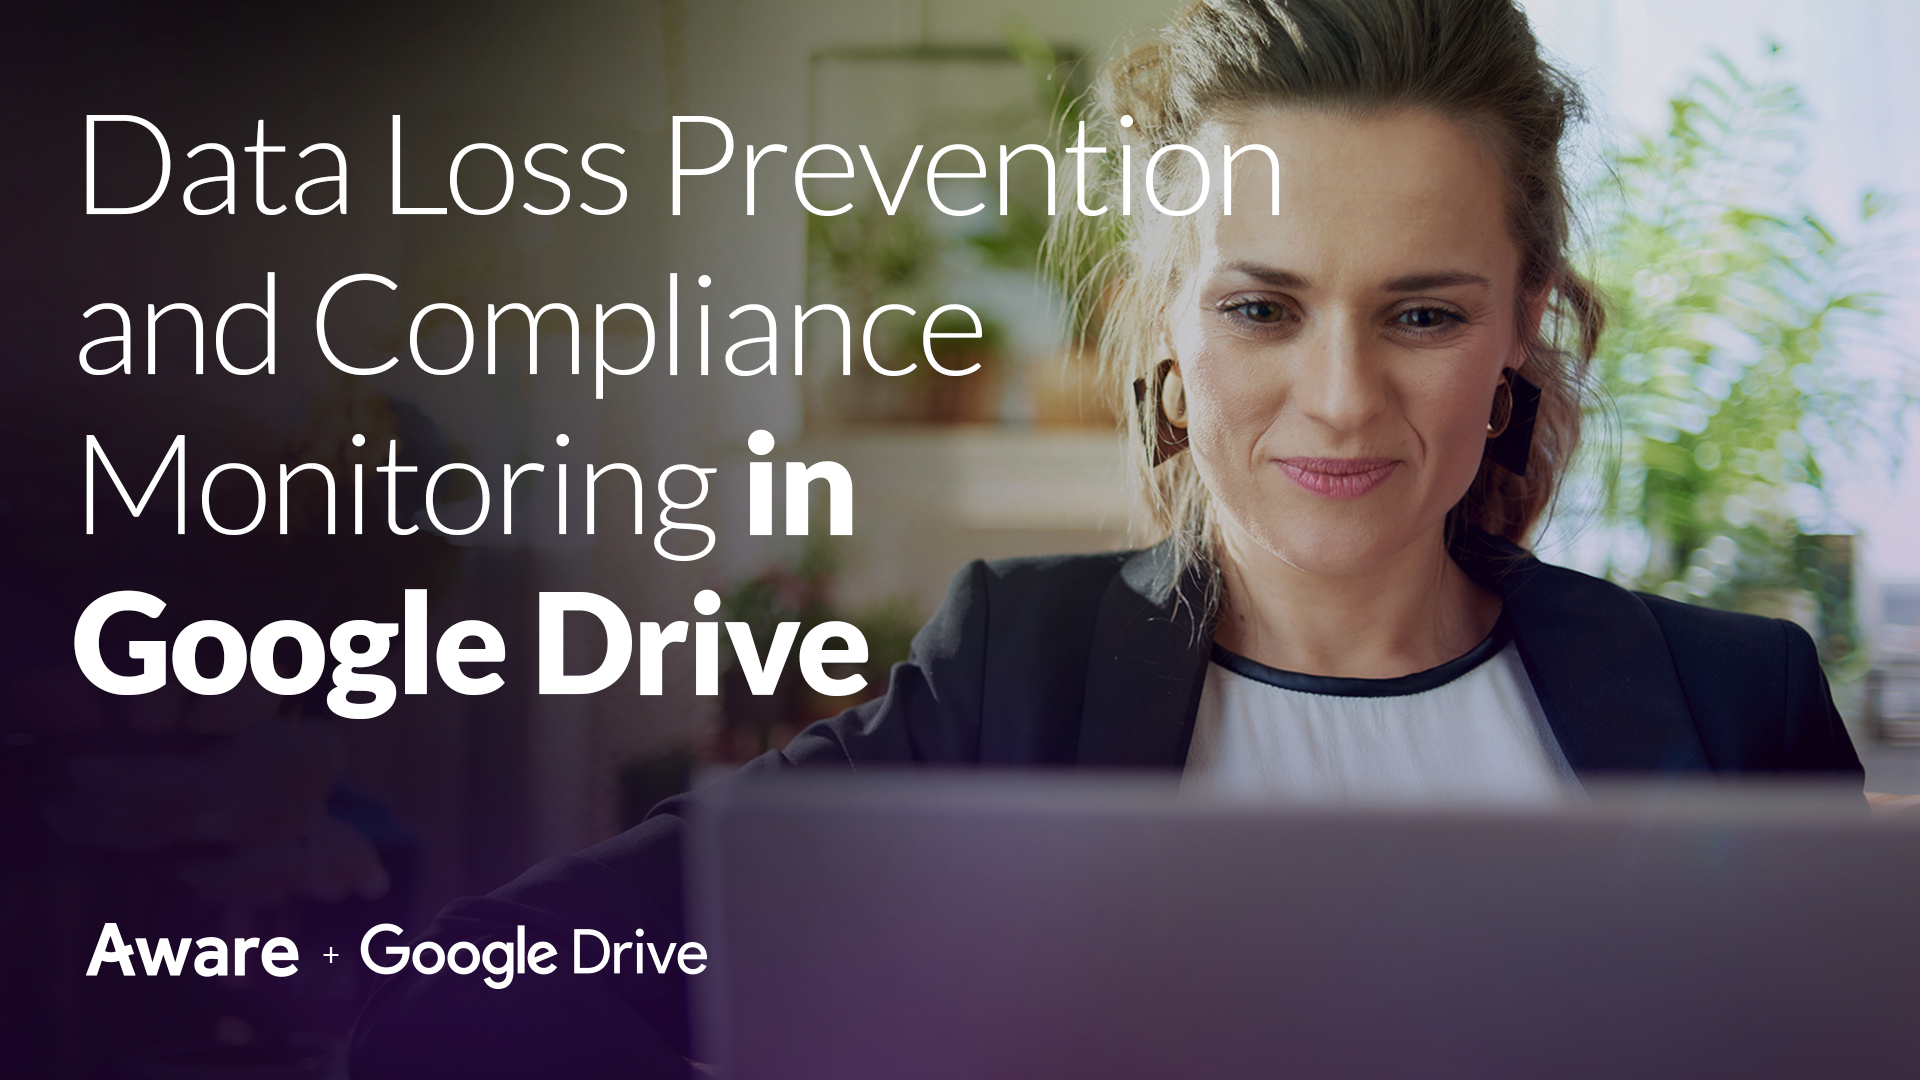 Data Loss Prevention and Compliance Monitoring in Google Drive